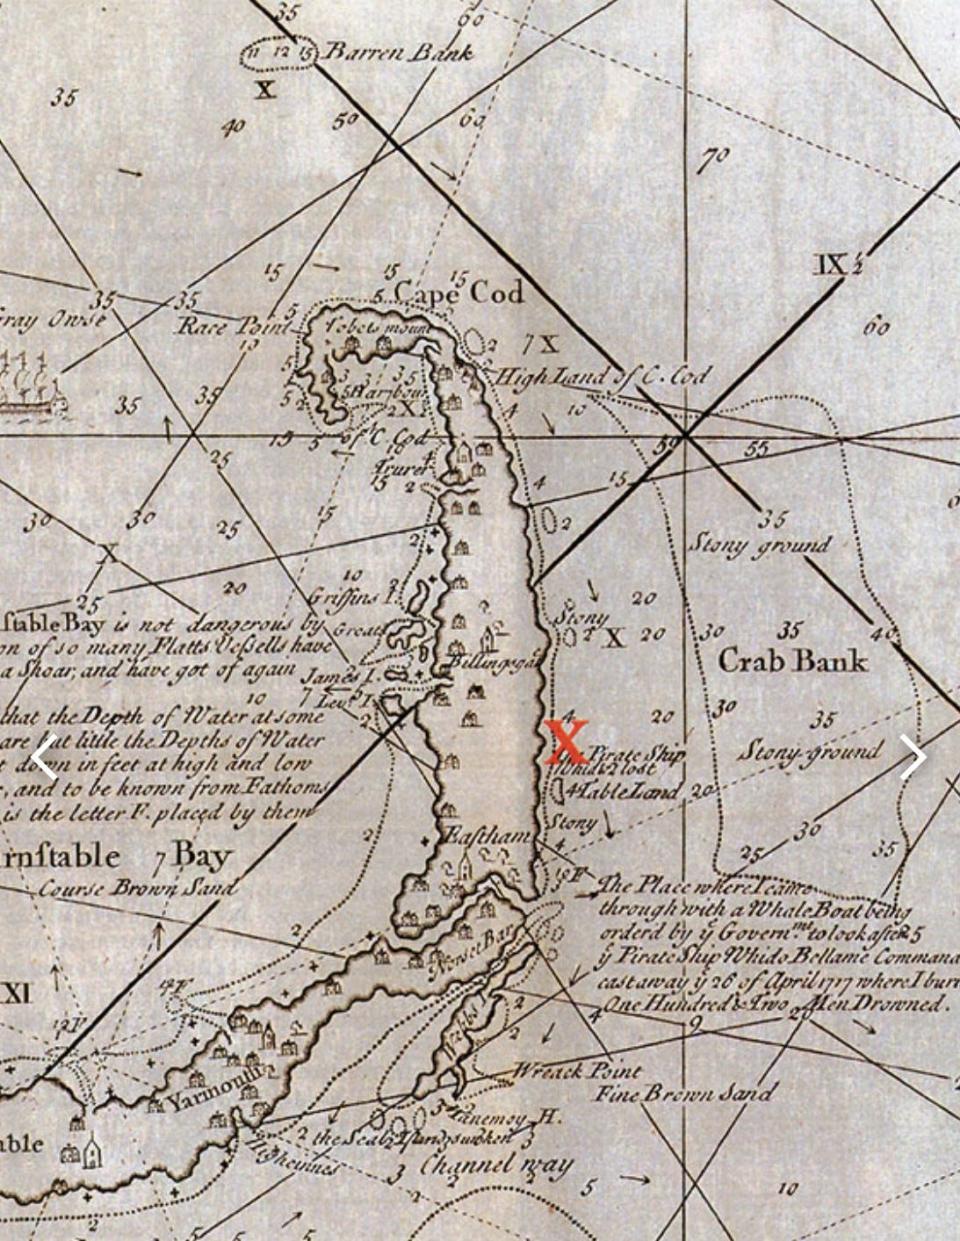 A 1717 map showing the location where the Whydah Gally sank off Wellfleet.